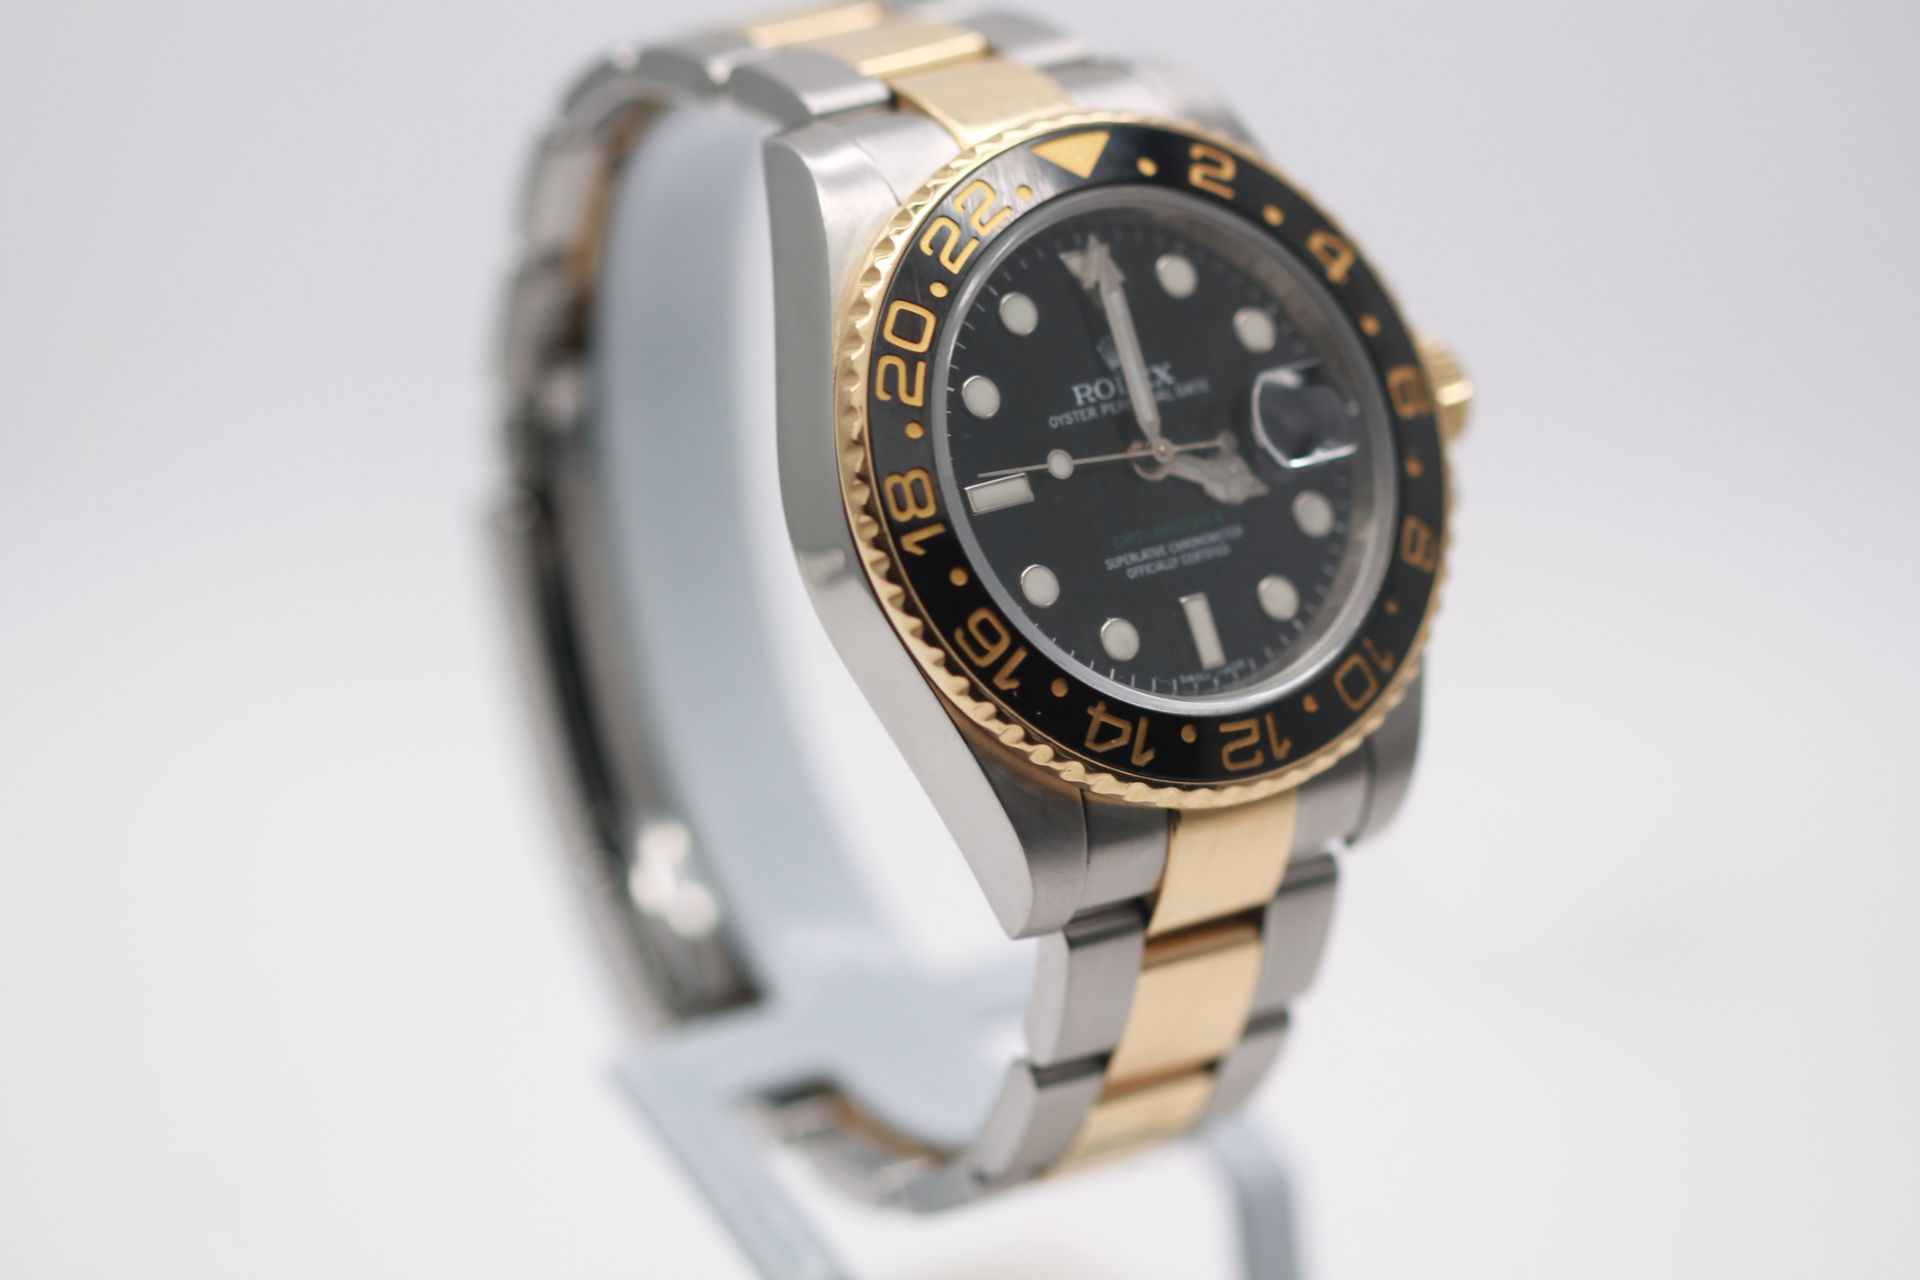 Gents Rolex, GMT Master Ii Bi Metal With Oyster Strap, 2008, Model- 116713Ln, Serial- M****91, - Image 2 of 6